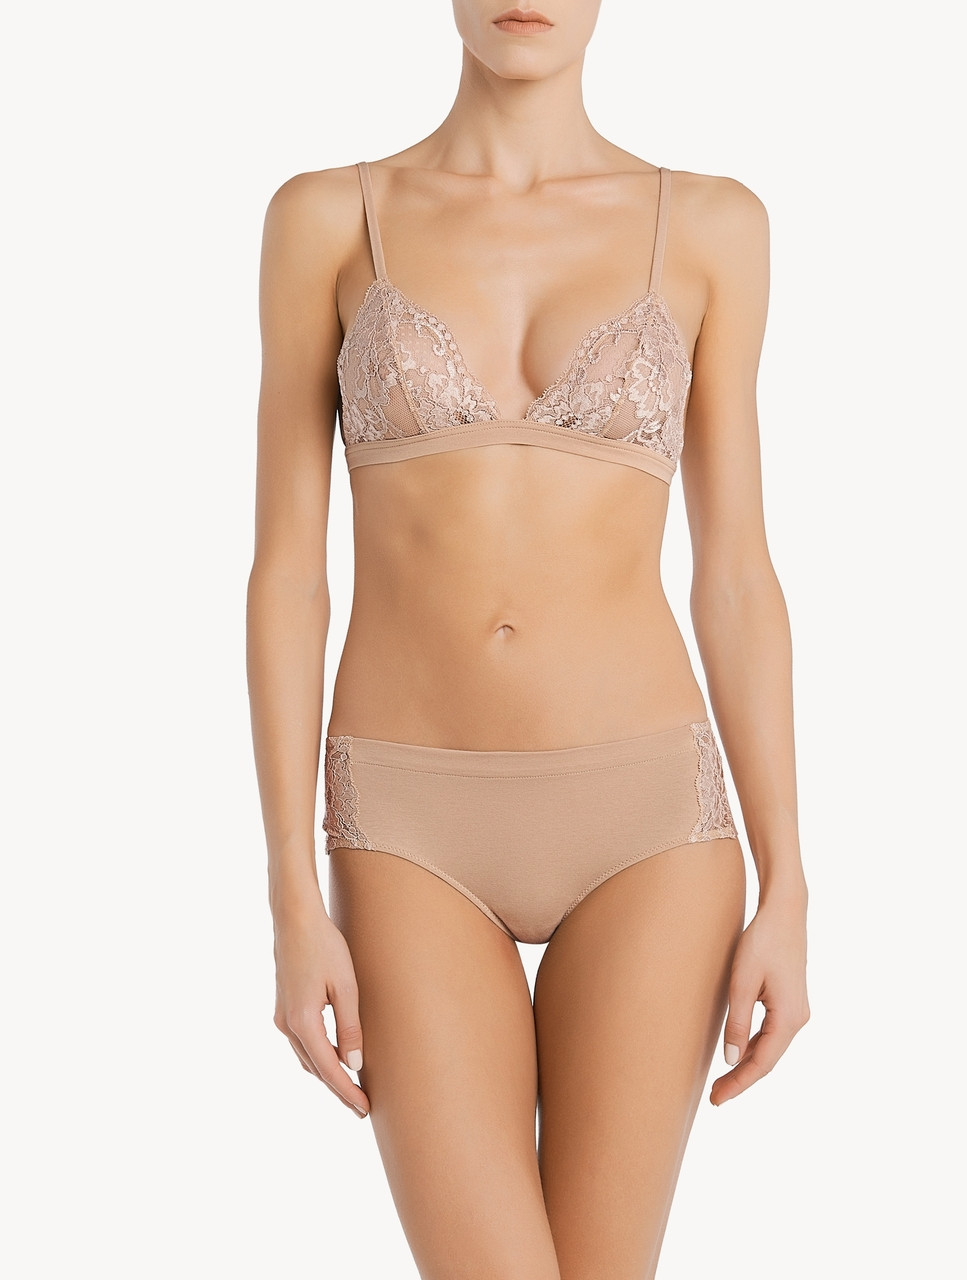 Nude lace triangle bra - ONLINE EXCLUSIVE